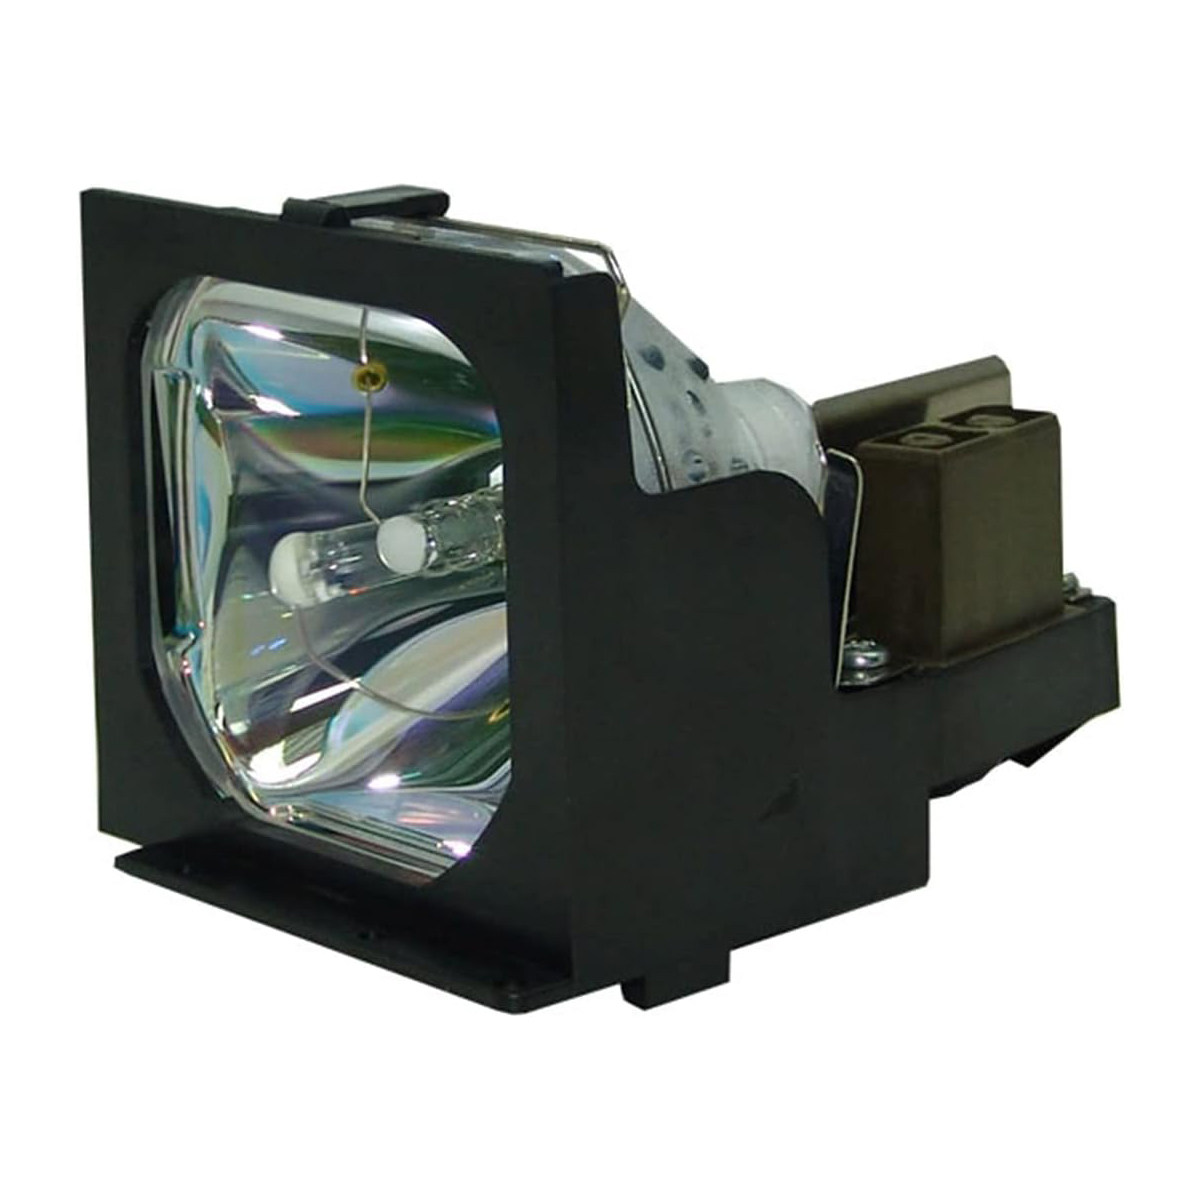 Replacement Projector lamp POA-LMP21 For Sanyo Projector